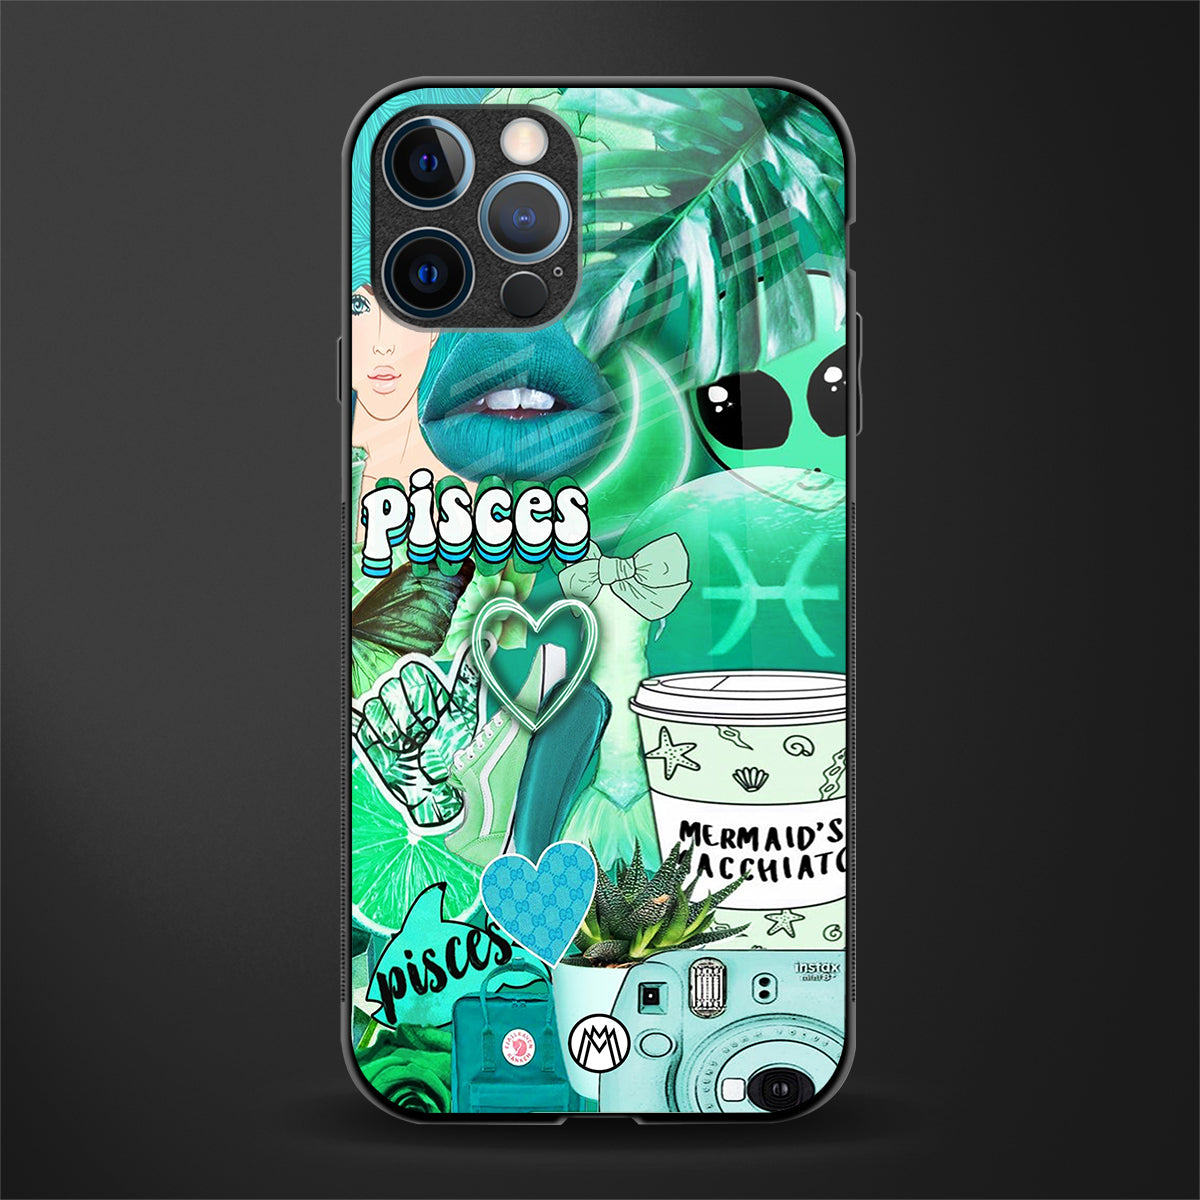 pisces aesthetic collage glass case for iphone 12 pro max image